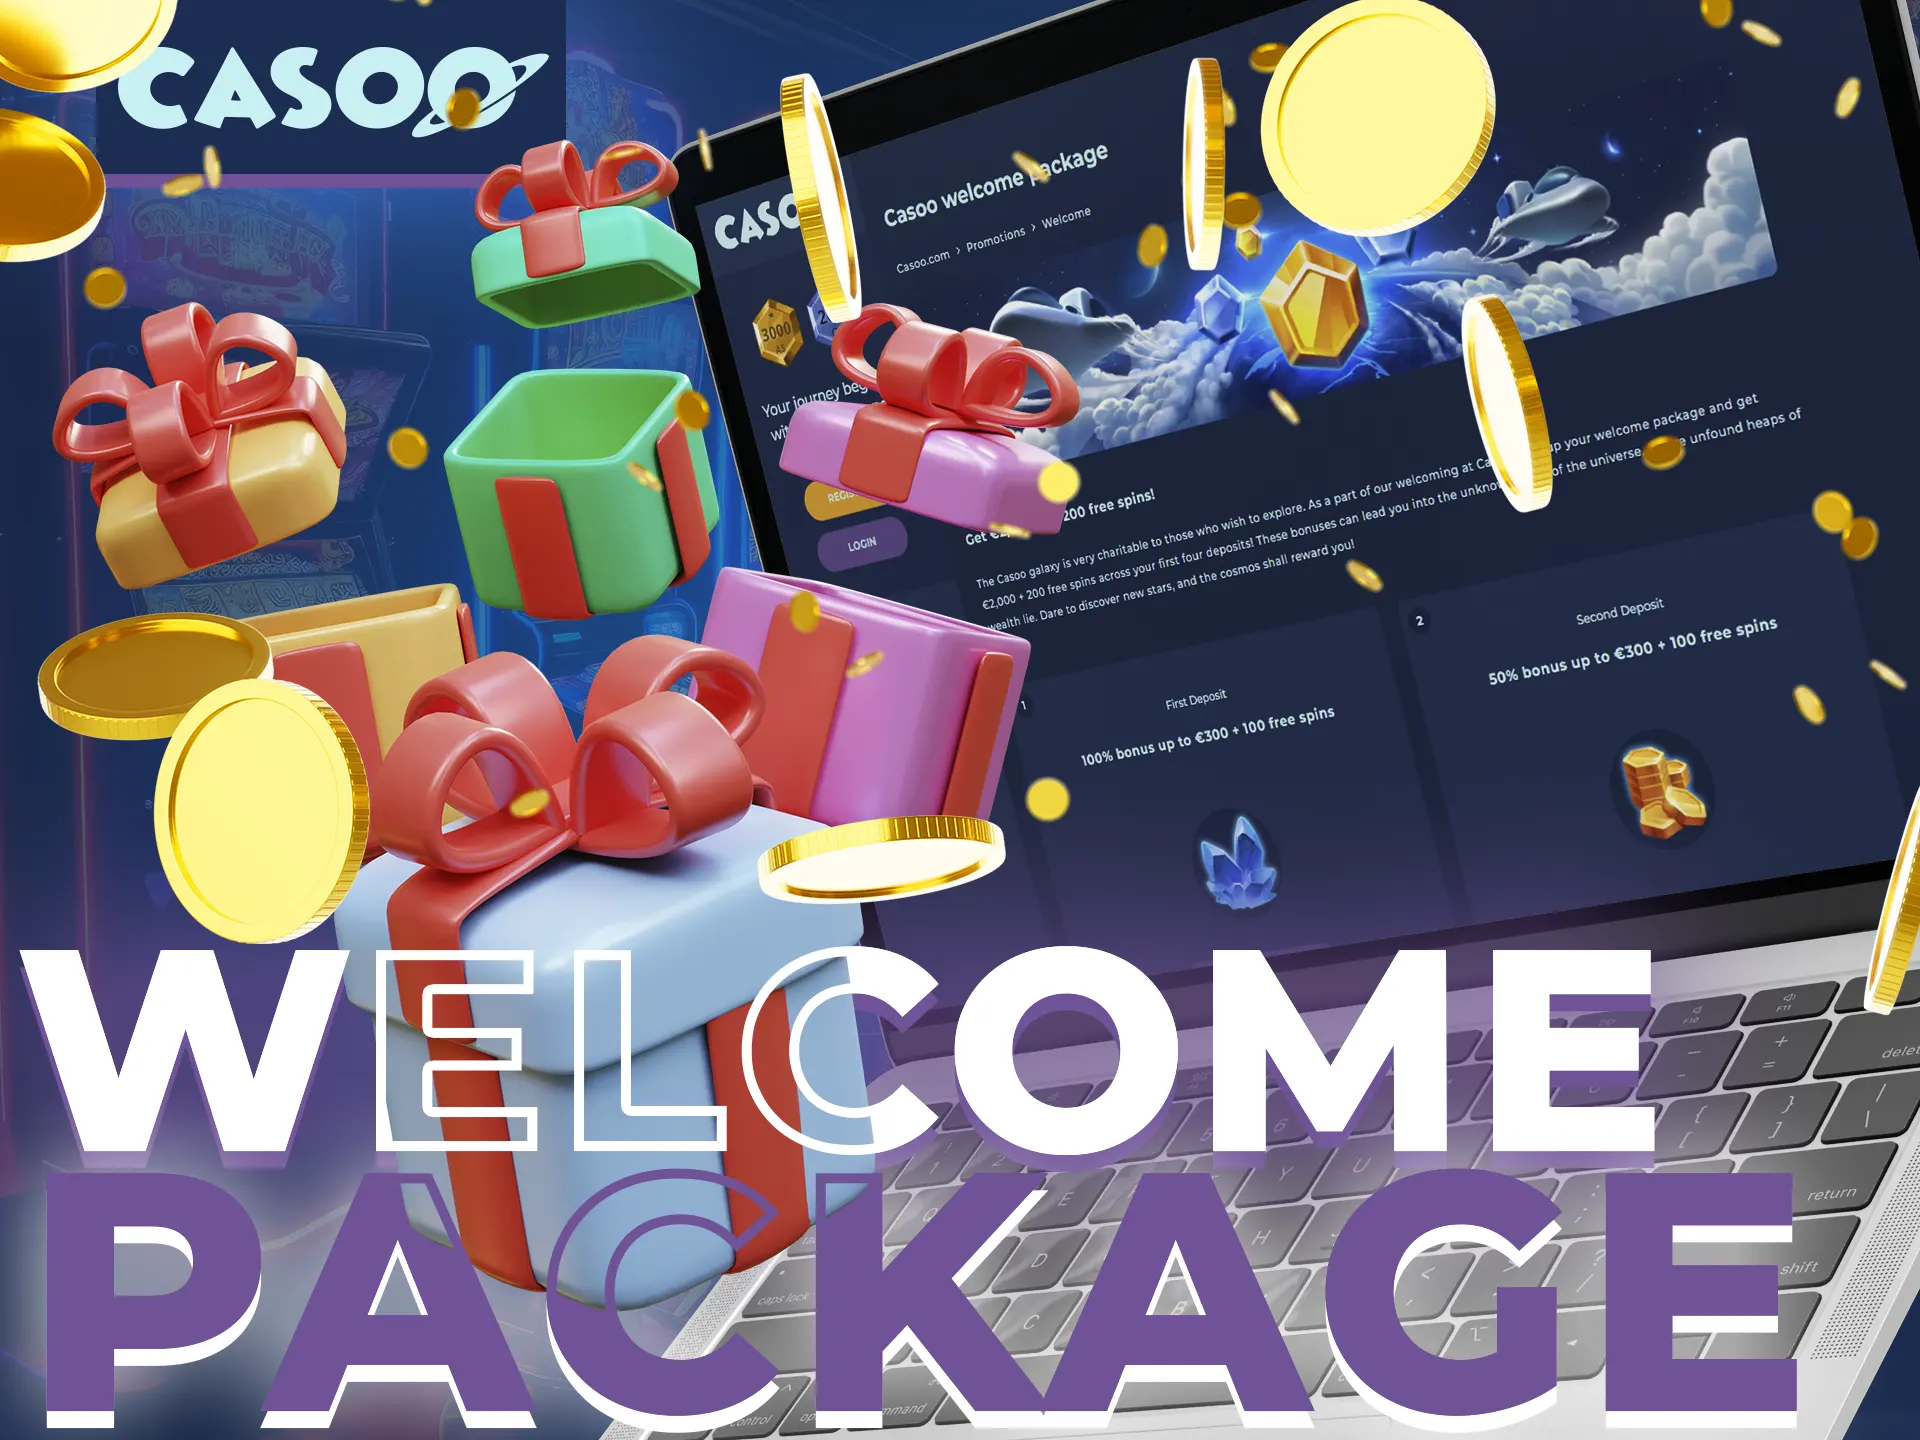 Take a great bonuses from welcome package and start making mind blowing winnings at Casoo!